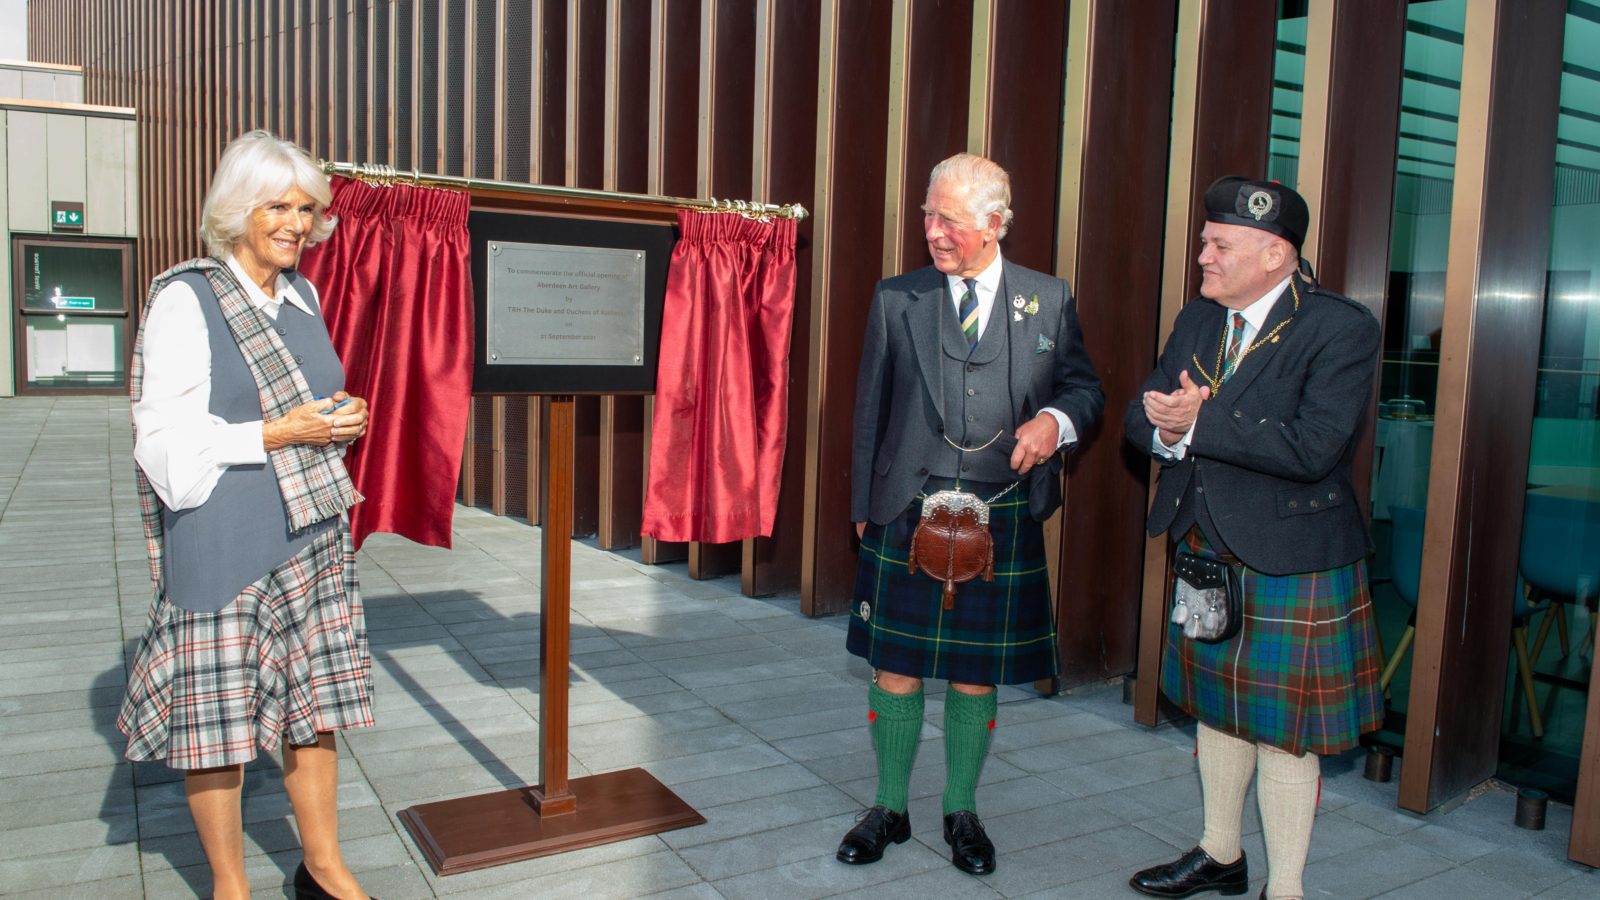 Royal official opening for Aberdeen Art Gallery